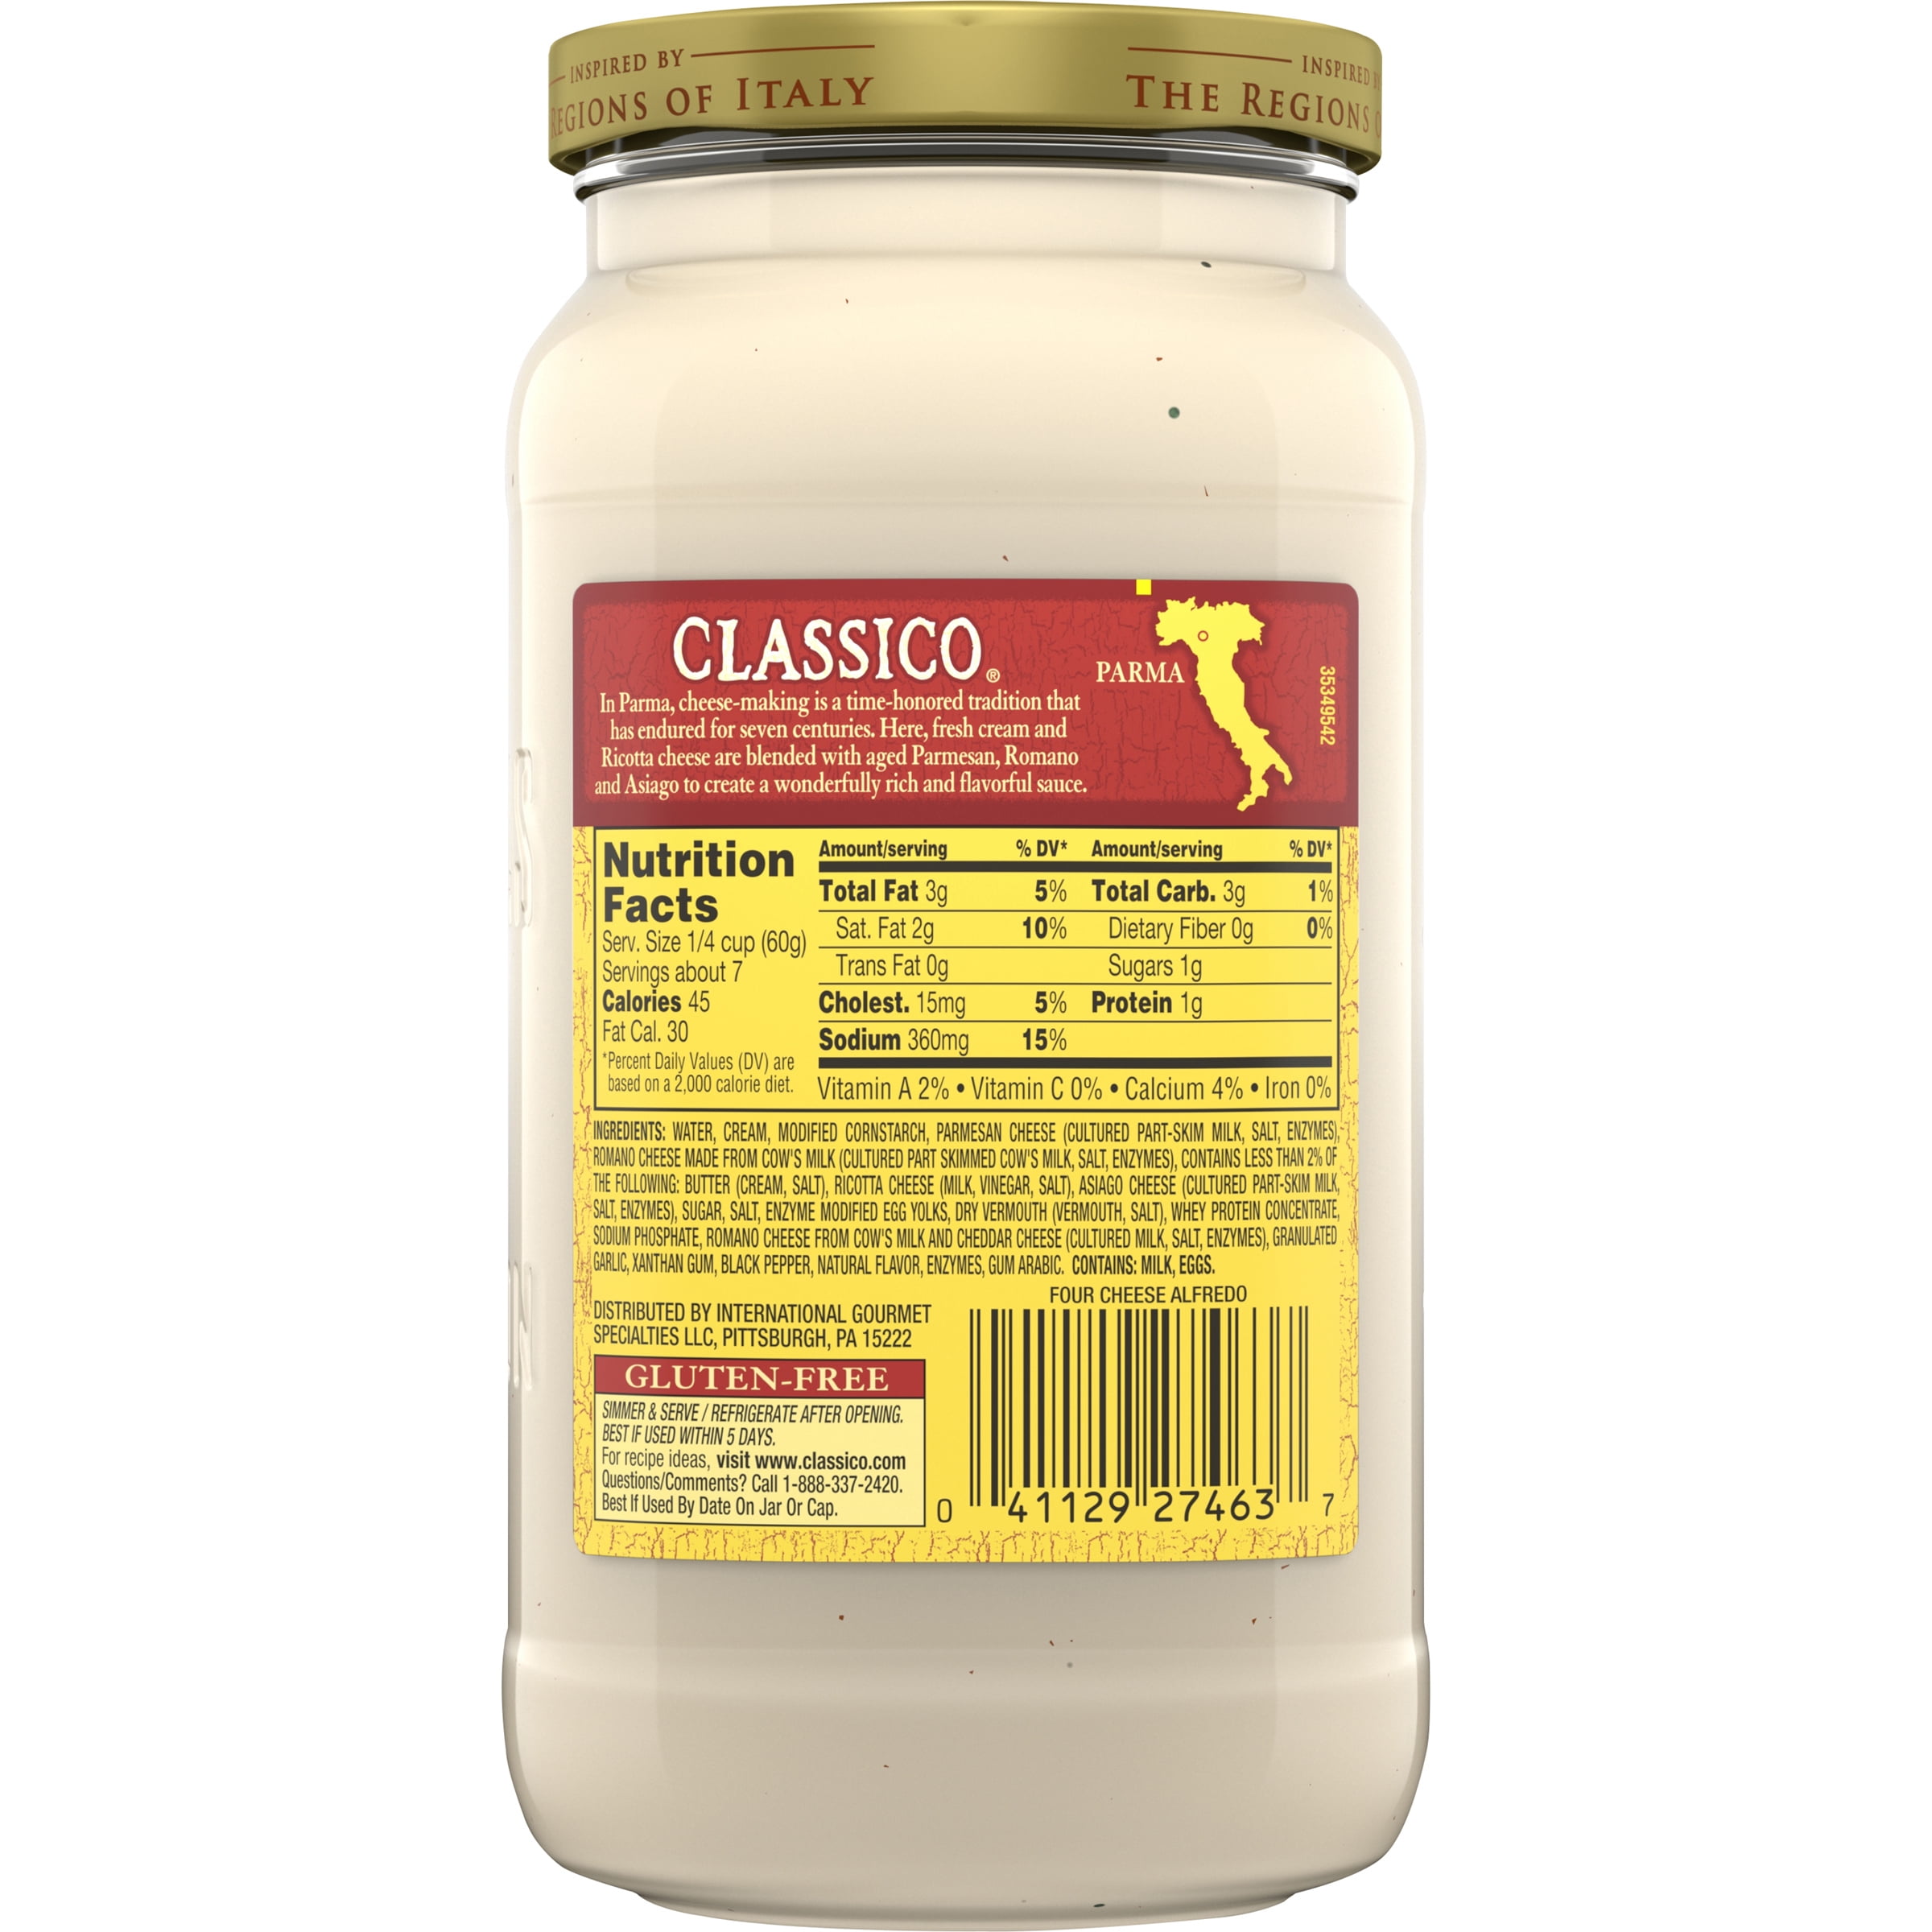 Classico Four Cheese Sauce Nutrition